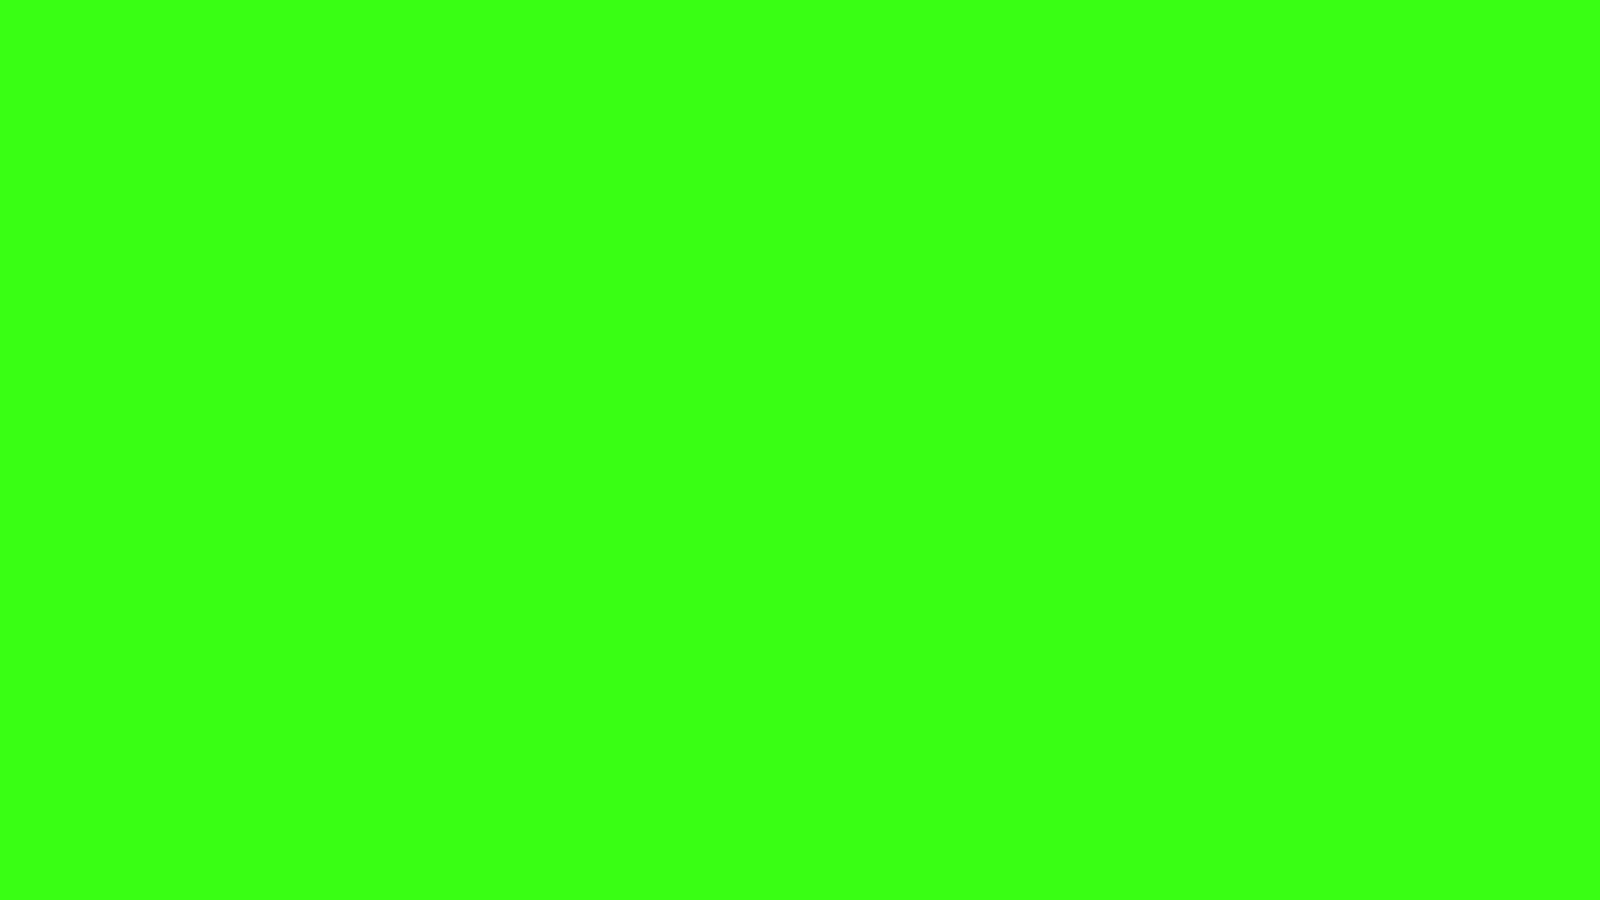 Free 1600x900 resolution Neon Green solid color background view and